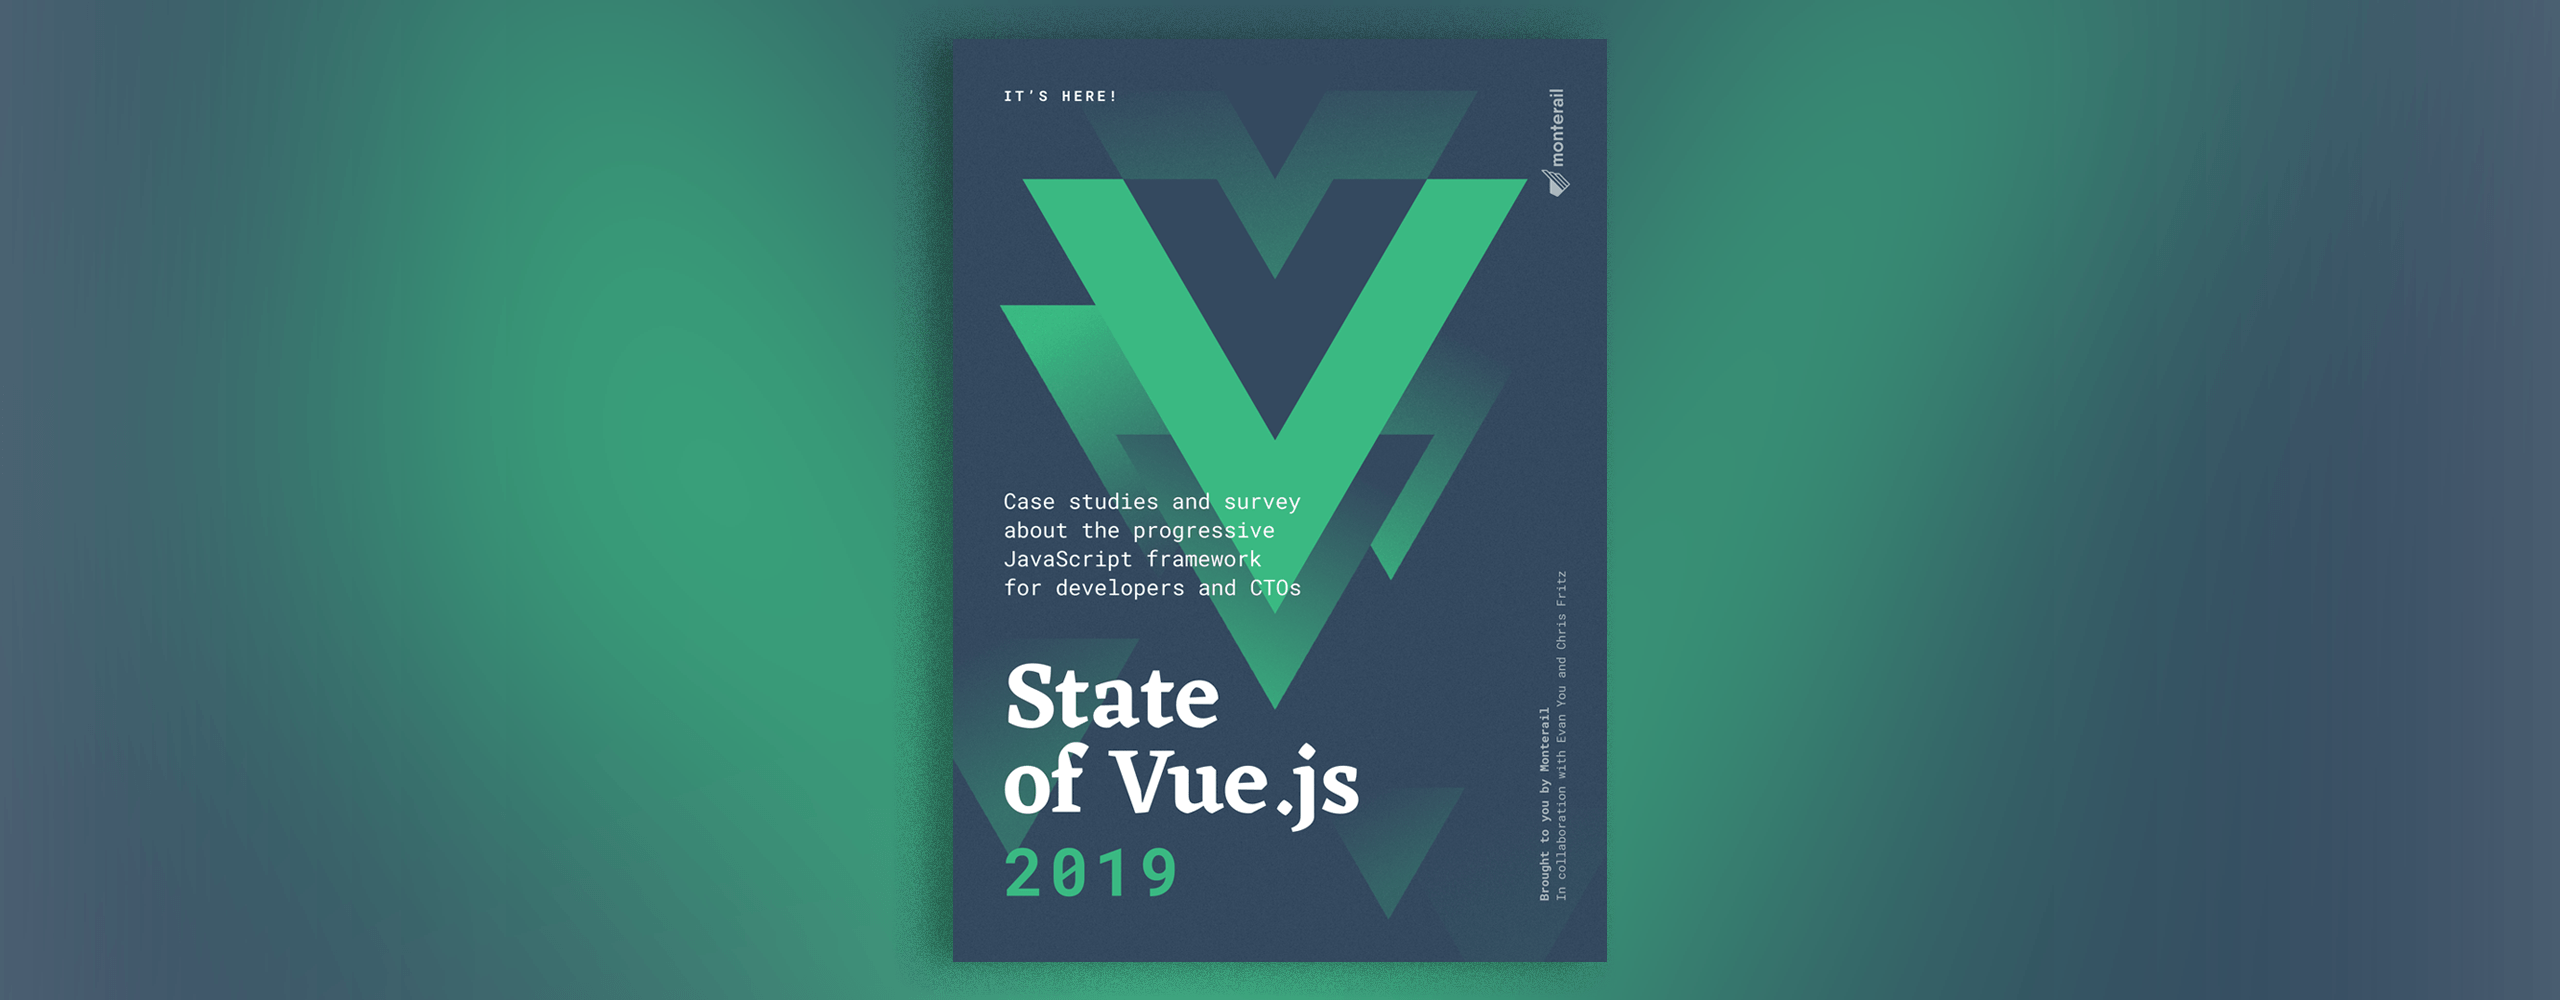 All The Numbers From The State of Vue.js Report 2019